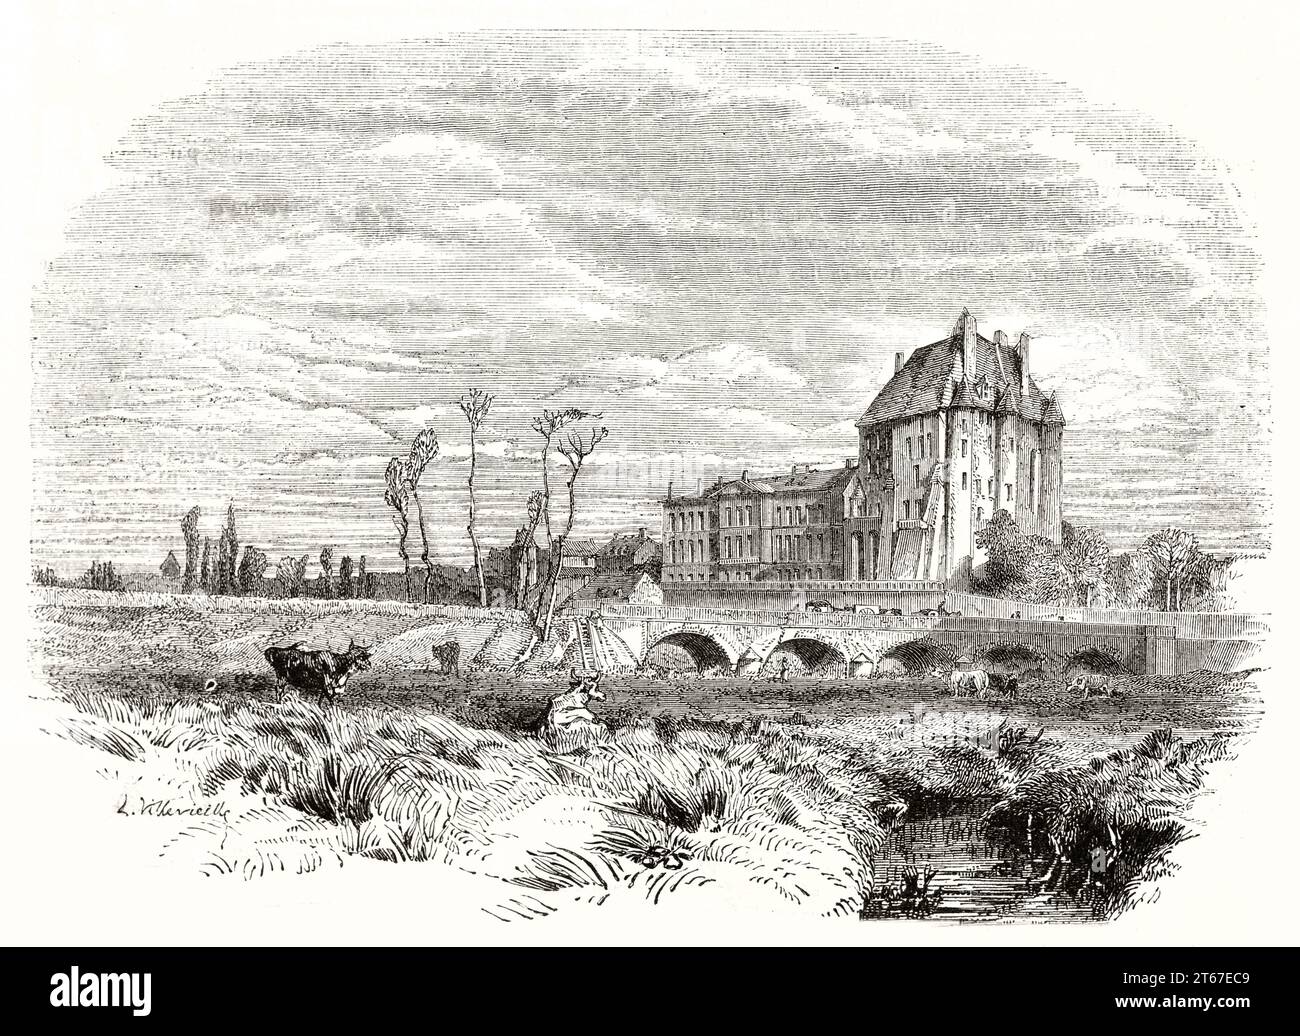 Old view of Chateauroux, France. By Villevieille, publ. on Magasin Pittoresque, Paris, 1851 Stock Photo